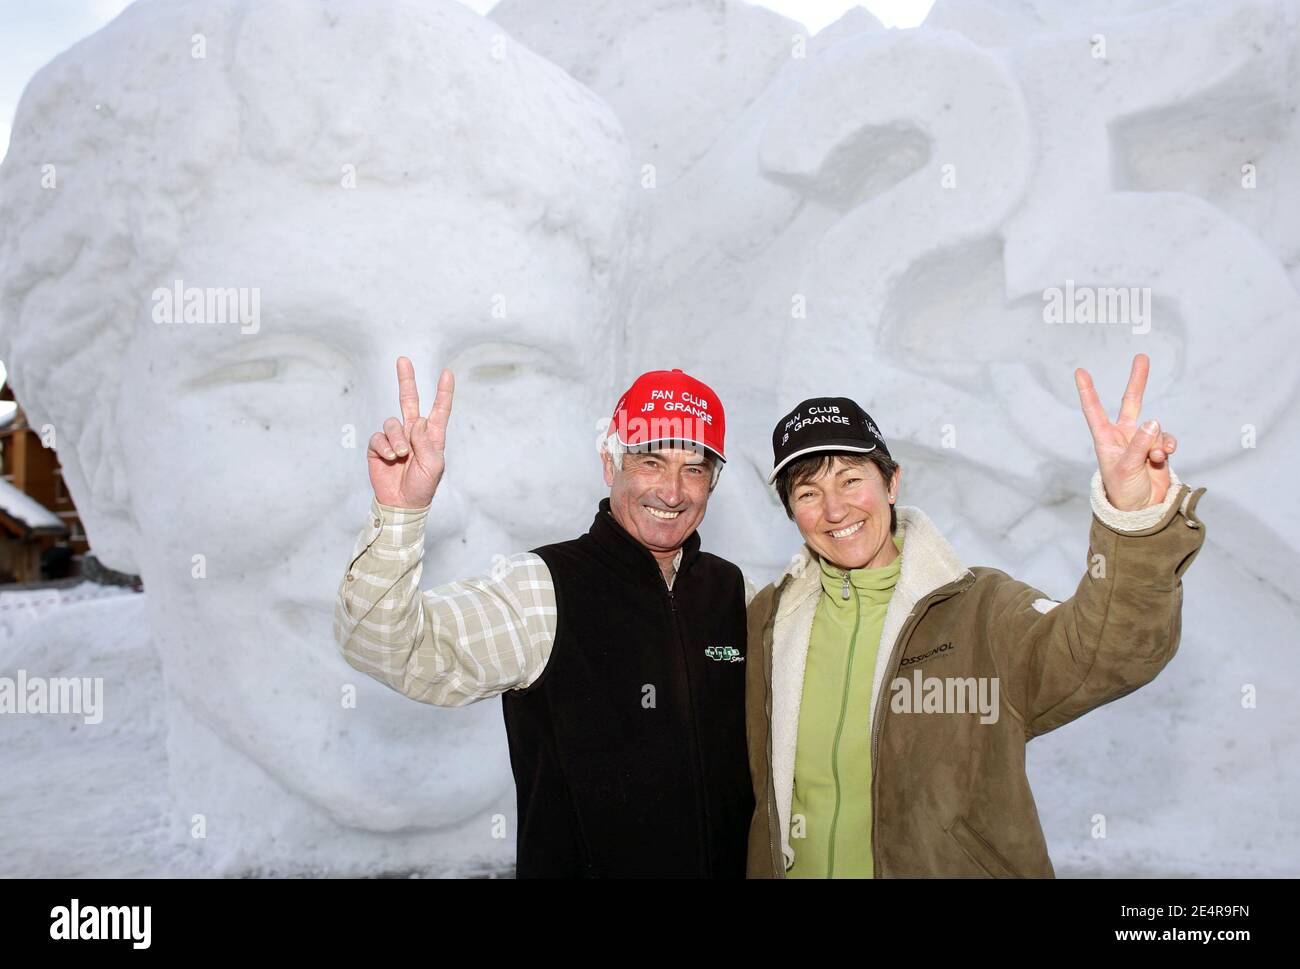 French skiing champion Jean-Baptiste Grange's parents, Jean-Pierre and  Annick, pose for our photographer in front of Jean Baptiste Grange's ice  sculpture in Valloire, Savoie, France on January 26, 2008. Photo by Vincent